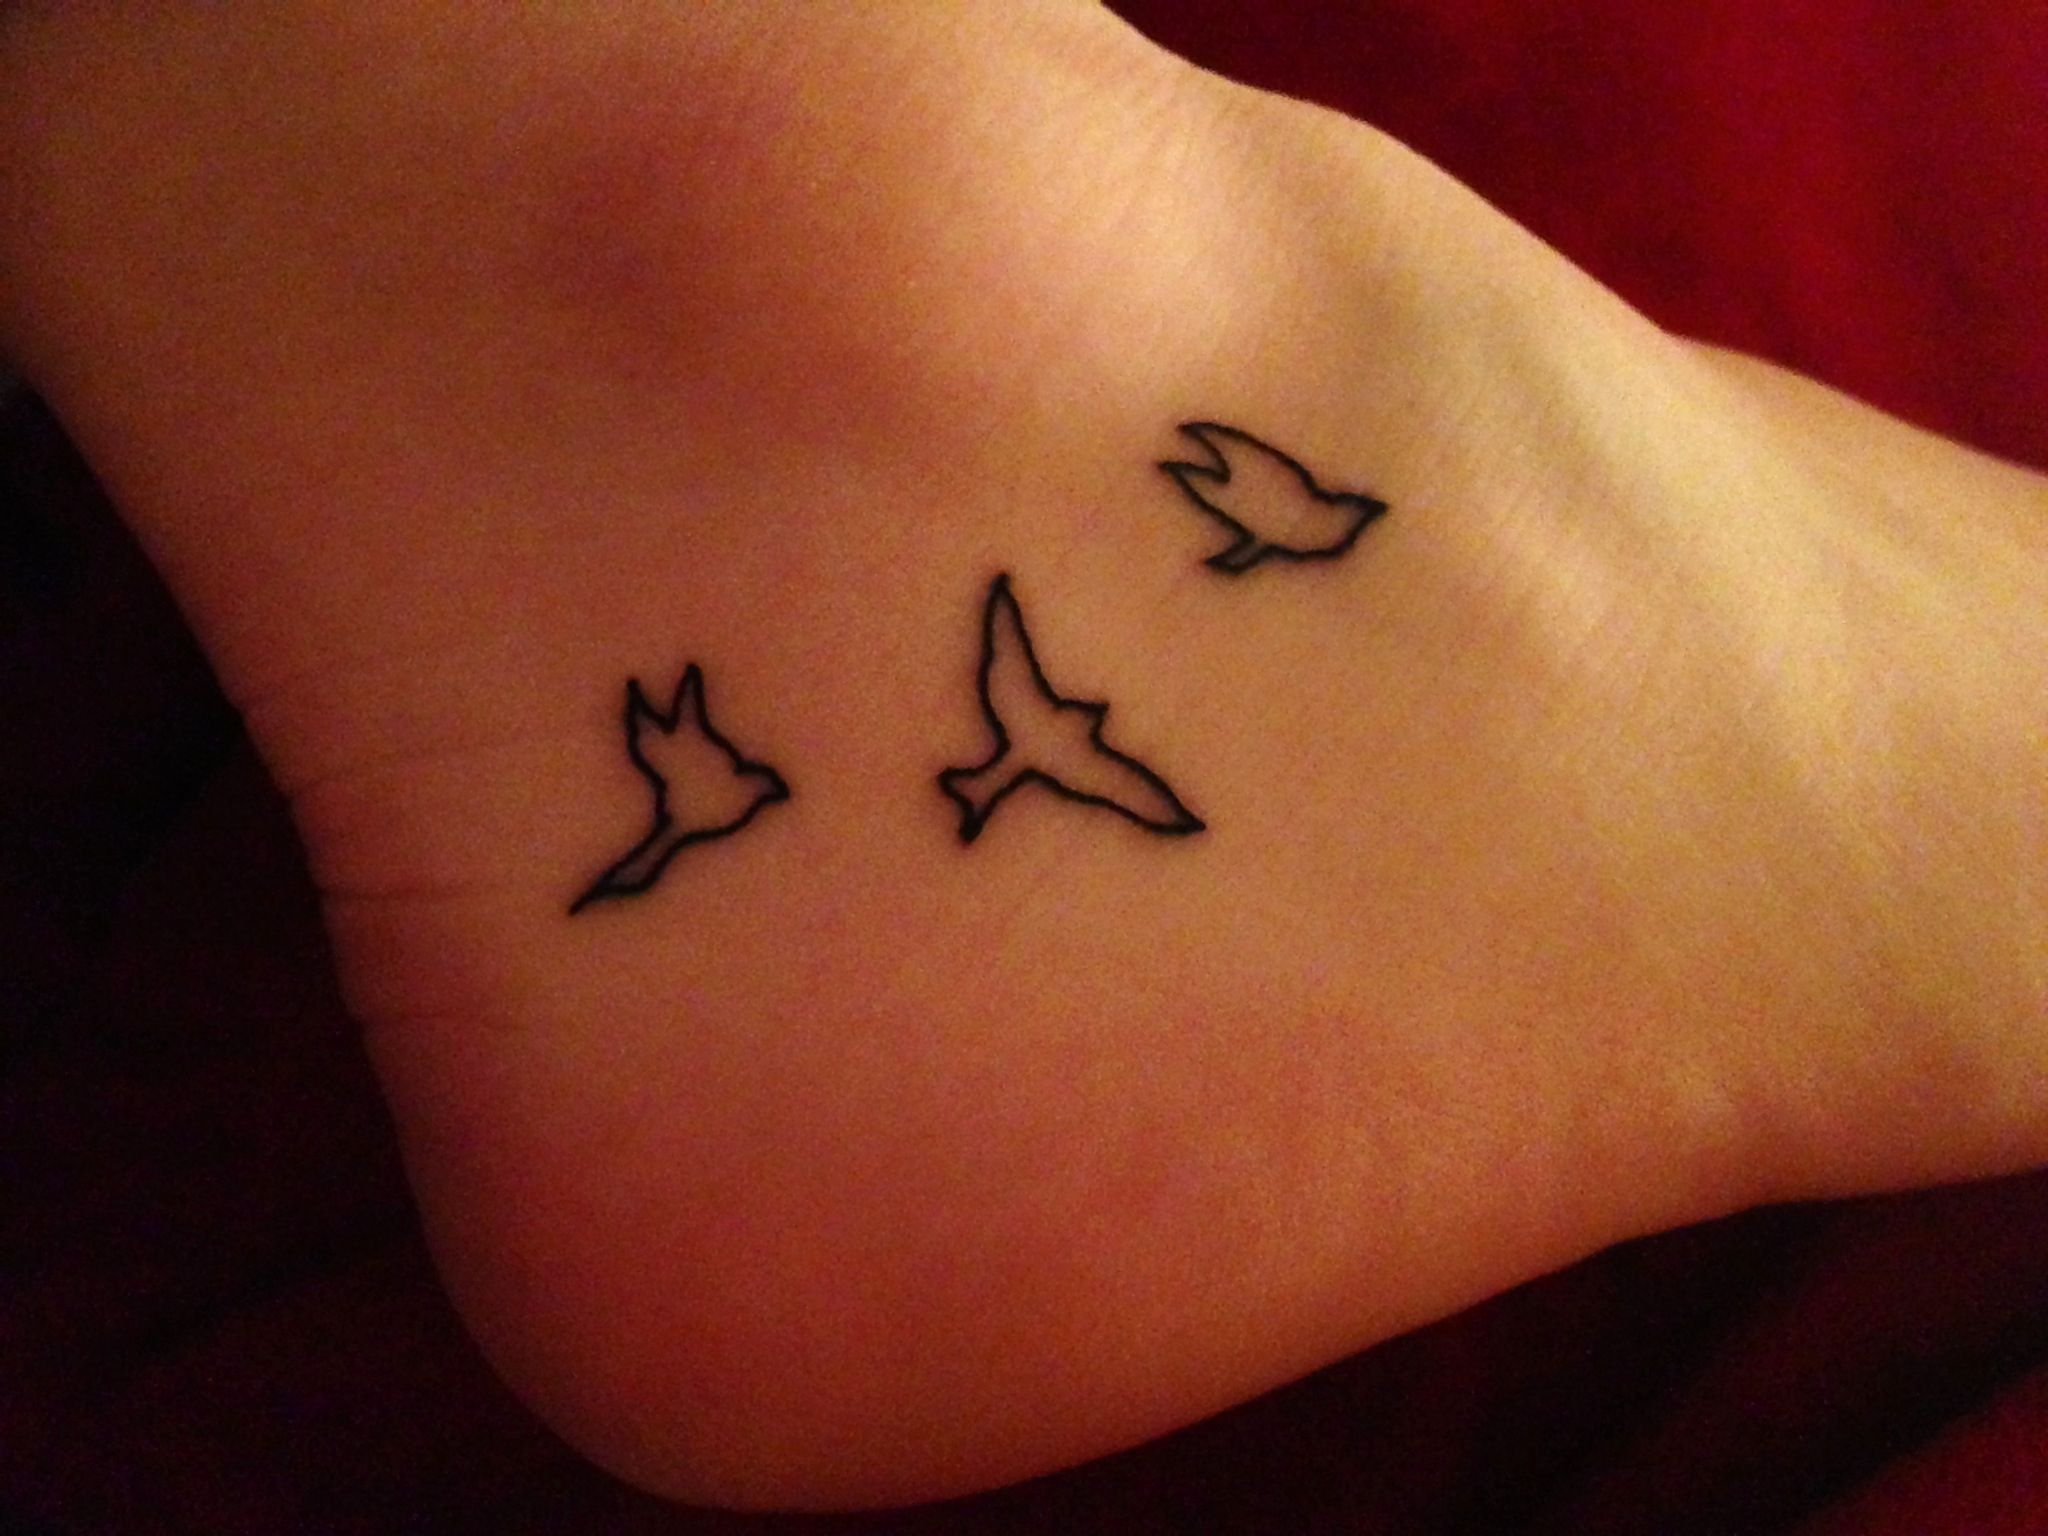 Bird Tattoo One For Each Sibling Representing Us Always Being Close intended for dimensions 2048 X 1536